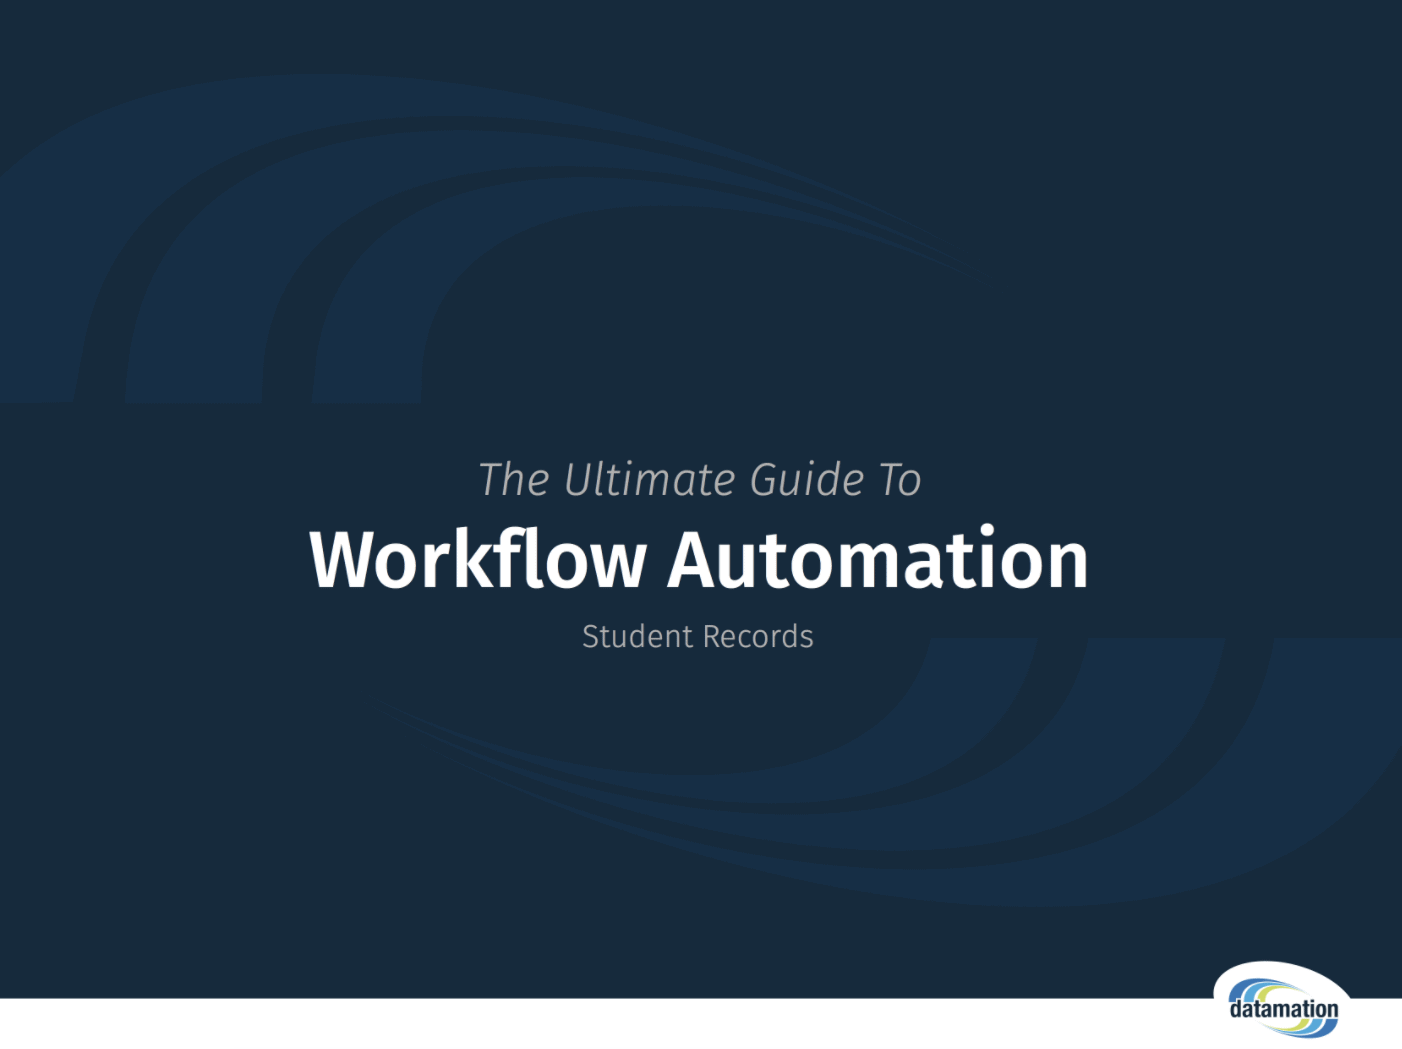 click to download the ultimate guide to student records workflow automation